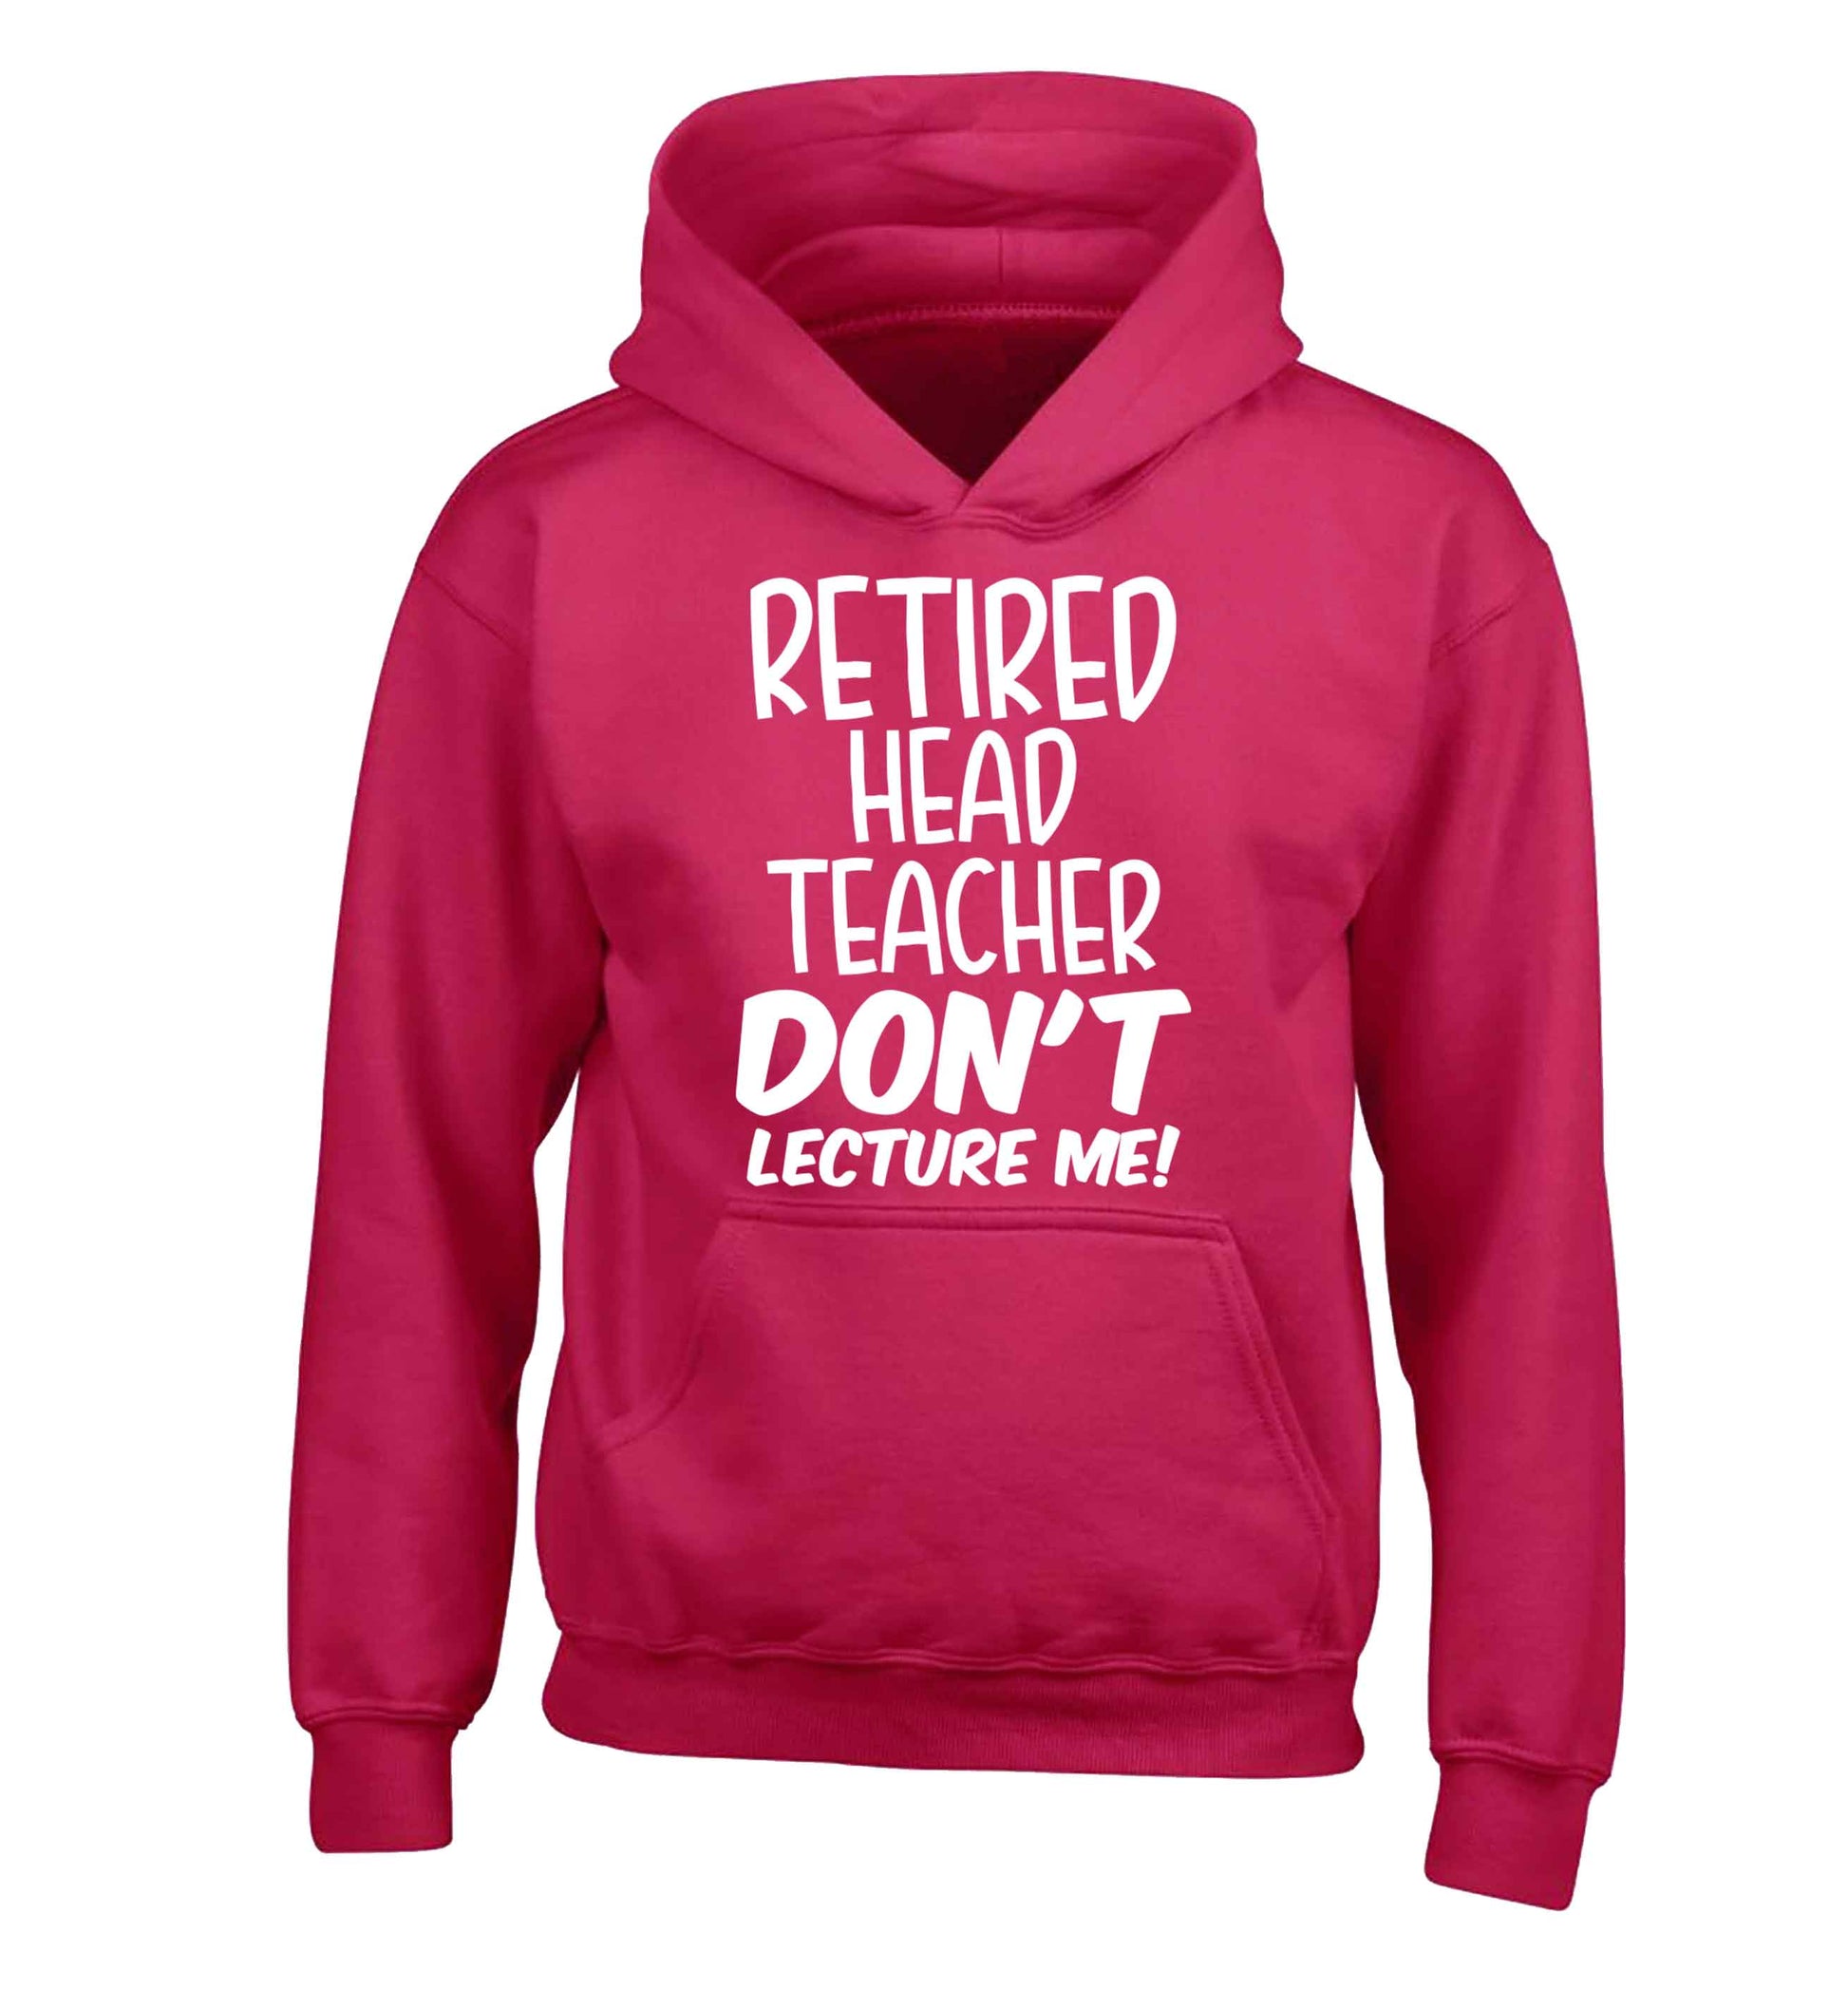 Retired head teacher don't lecture me! children's pink hoodie 12-13 Years